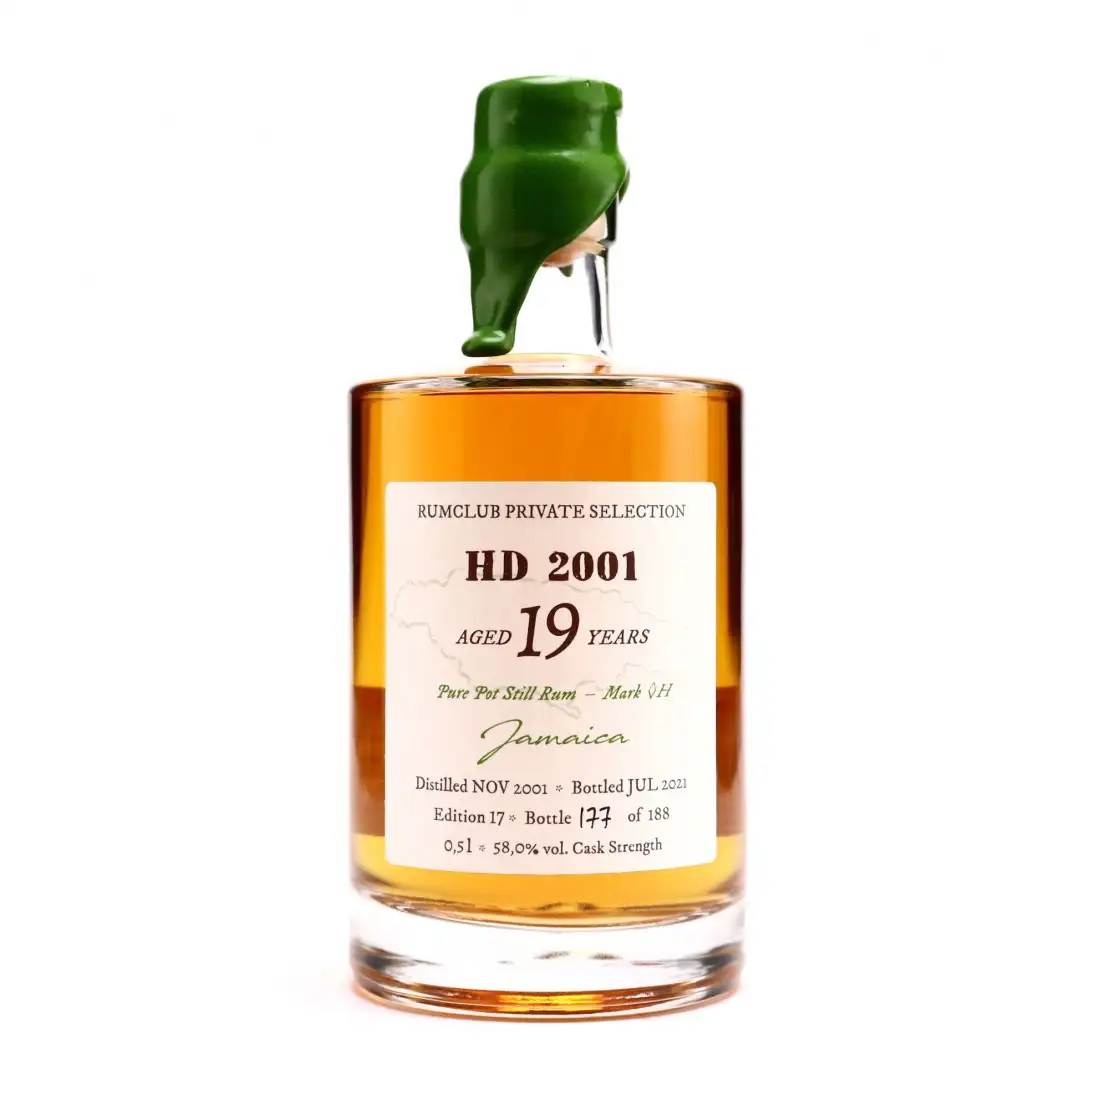 Image of the front of the bottle of the rum Rumclub Private Selection Ed. 17 HD <>H